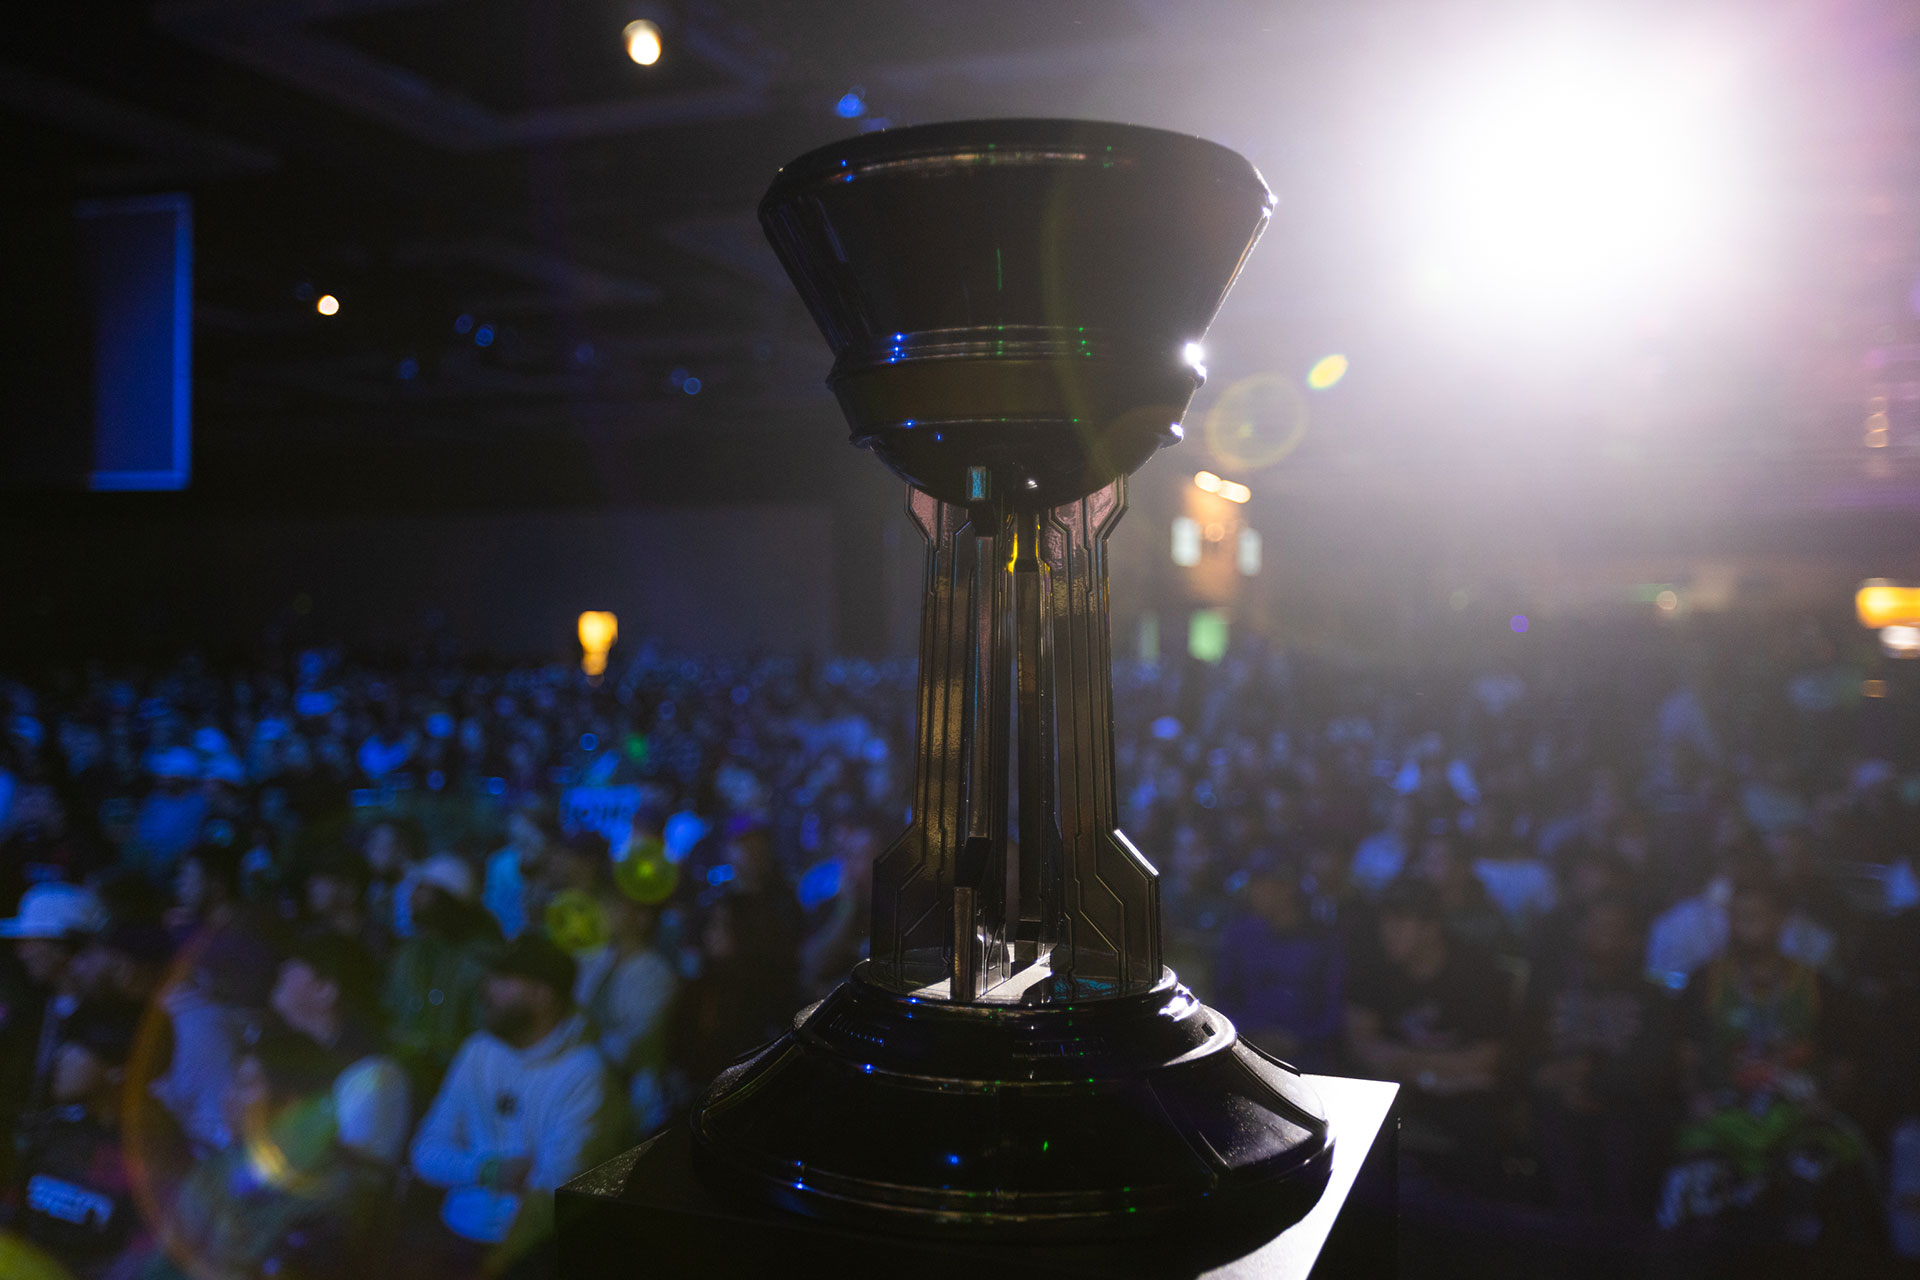 The coveted Halo World Championship trophy.